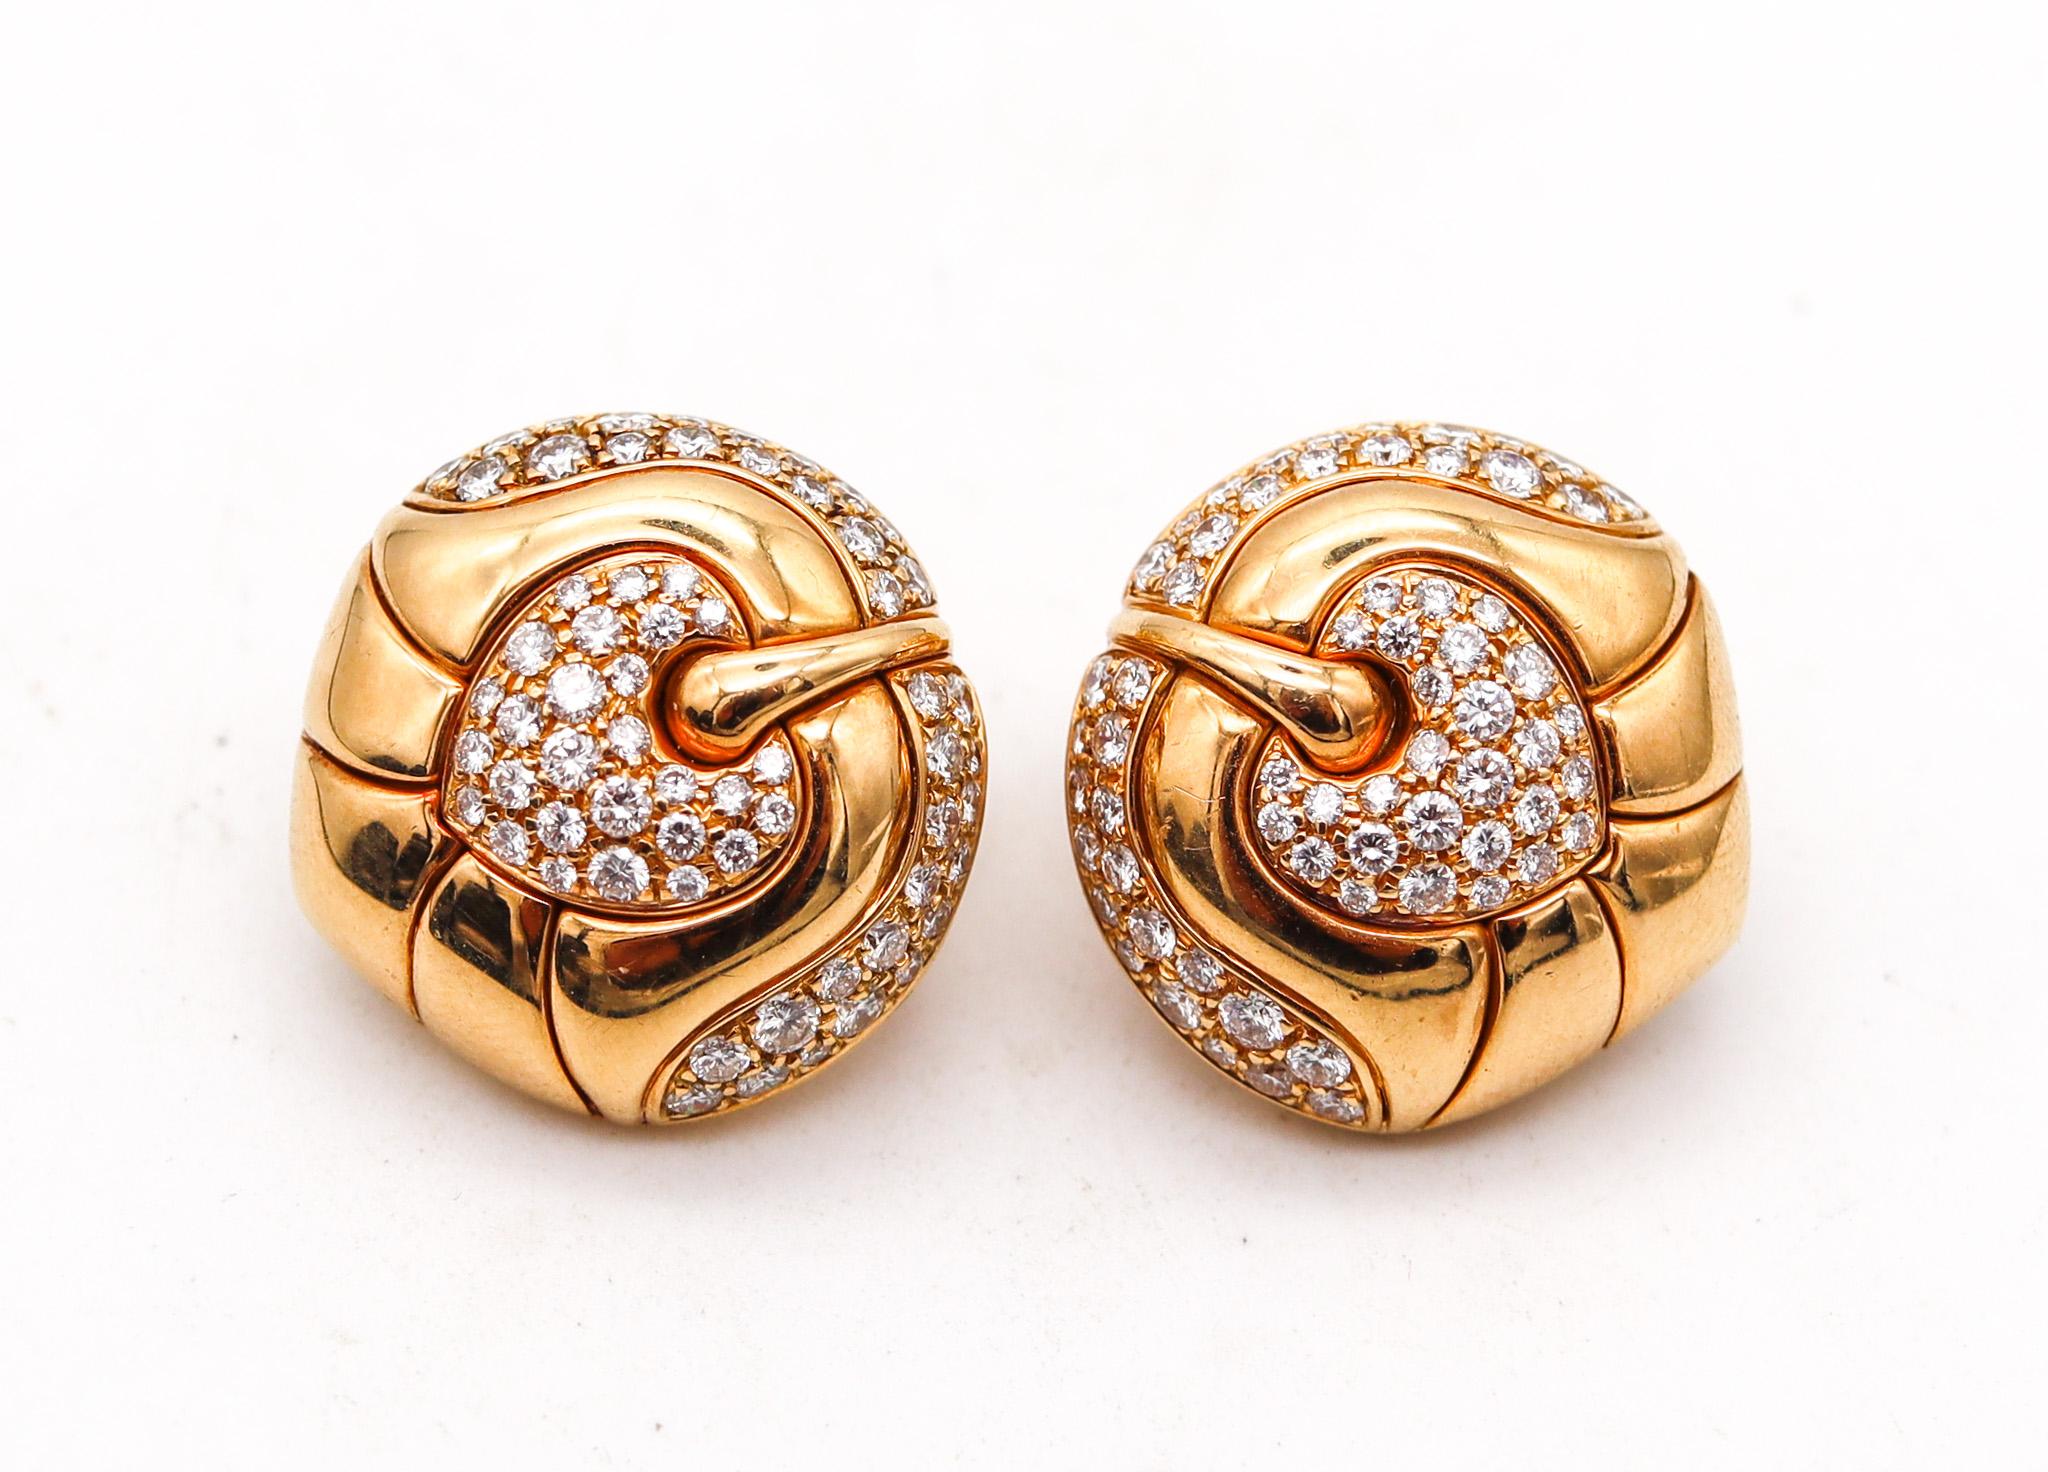 Modernist Bvlgari Roma Clips On Earrings In 18Kt Yellow Gold With 2.88 Cts In VS Diamonds For Sale